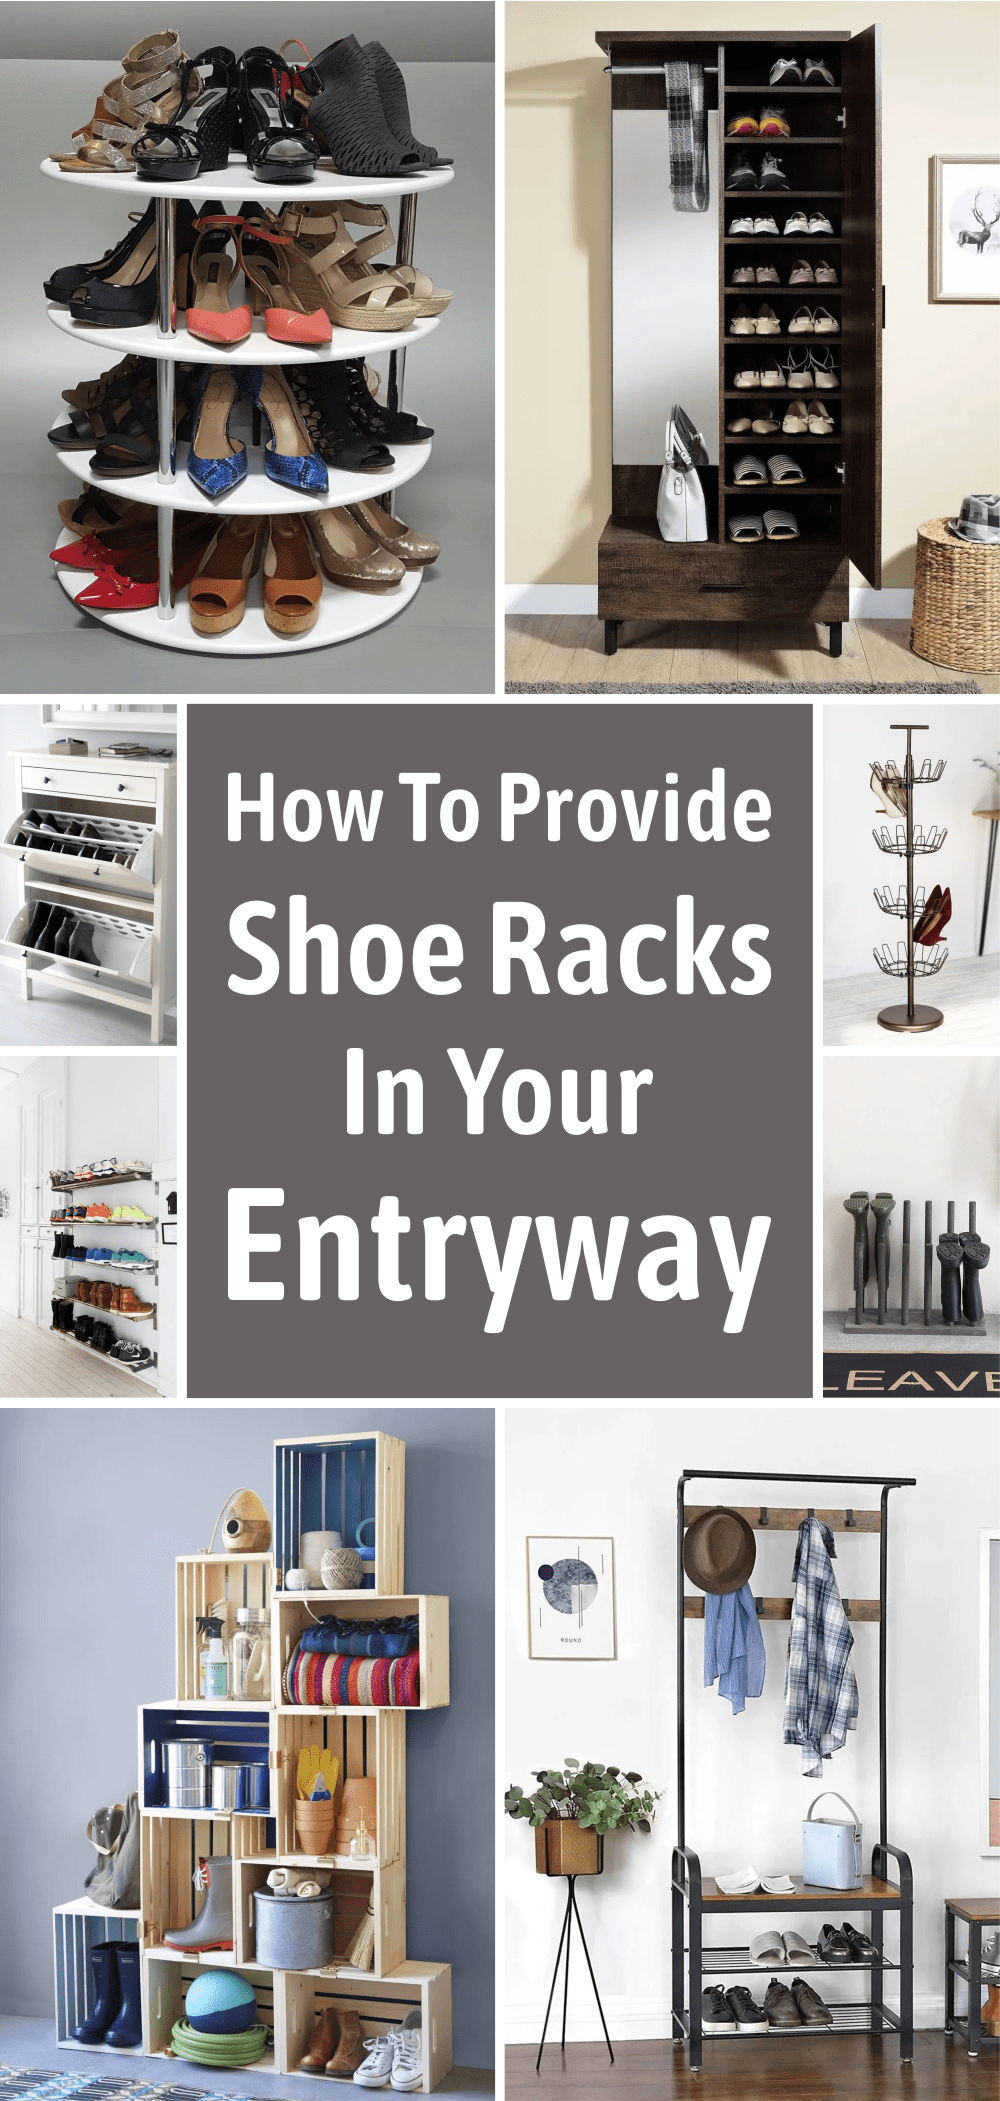 How to Provide Shoe Racks in Your Entryway